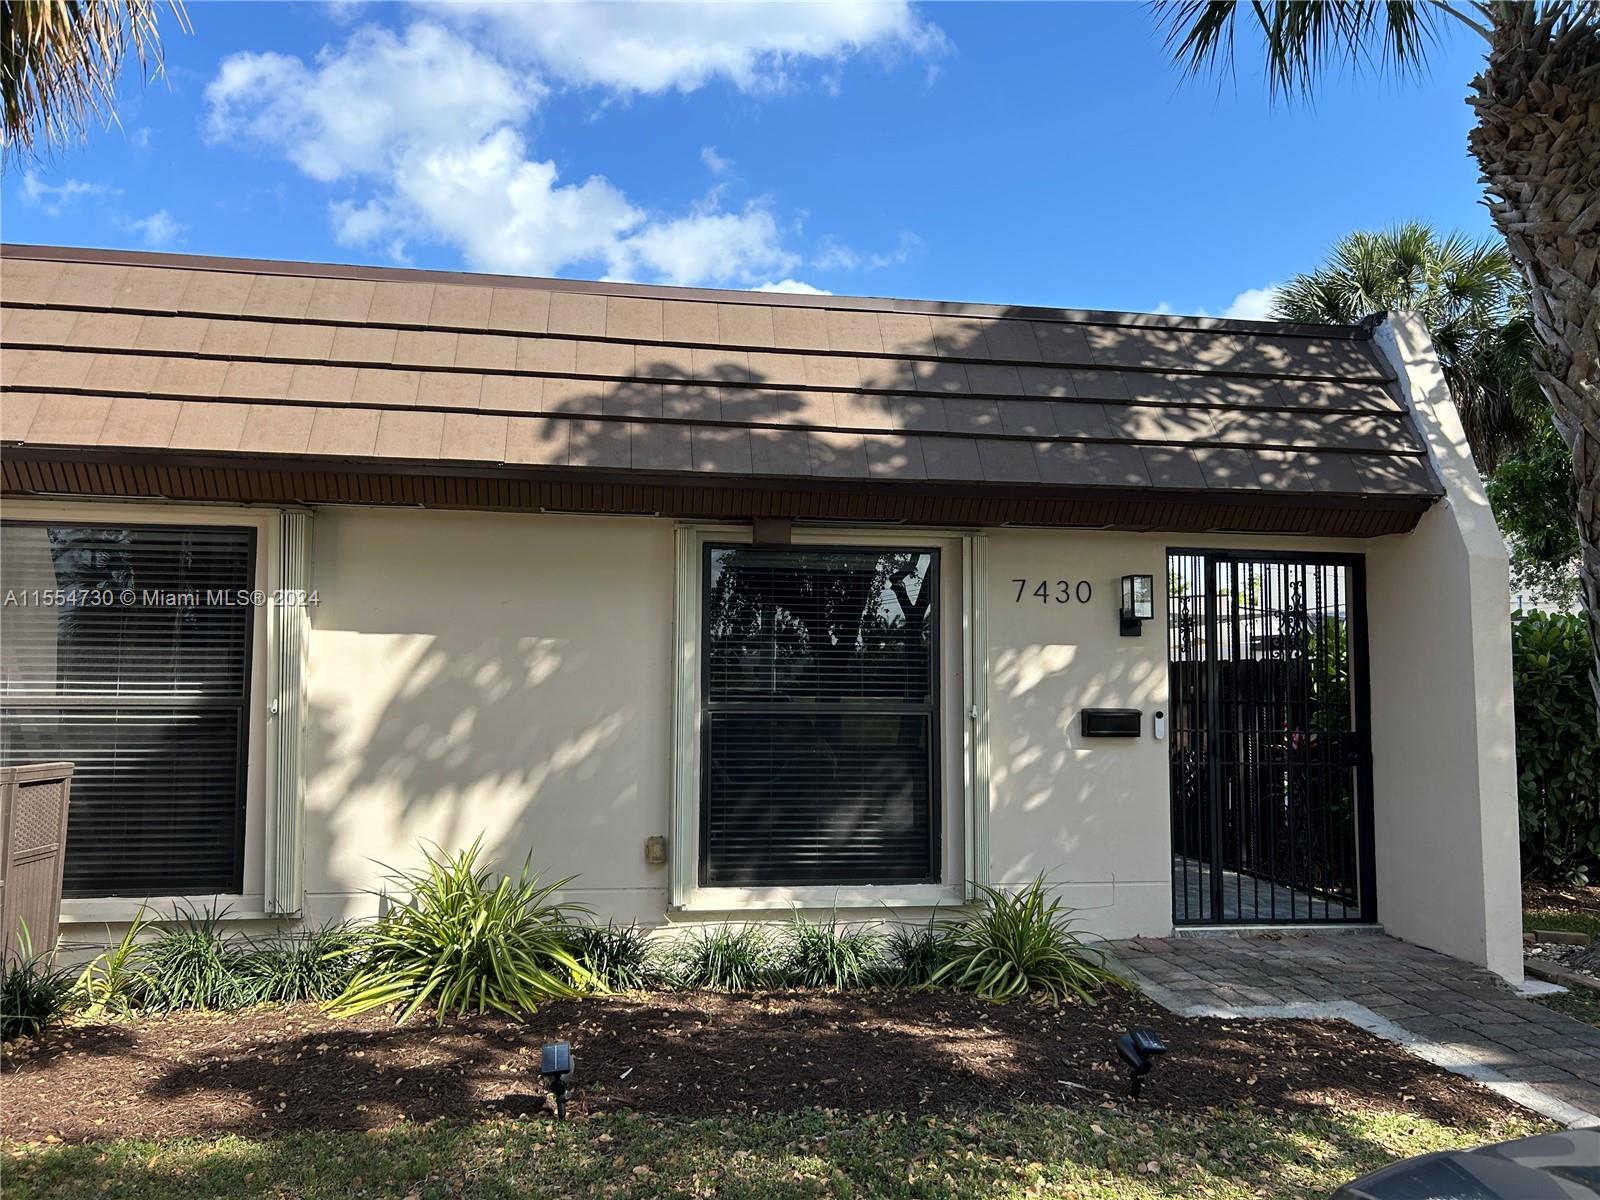 Photo of 7430 Big Cypress Dr in Miami Lakes, FL